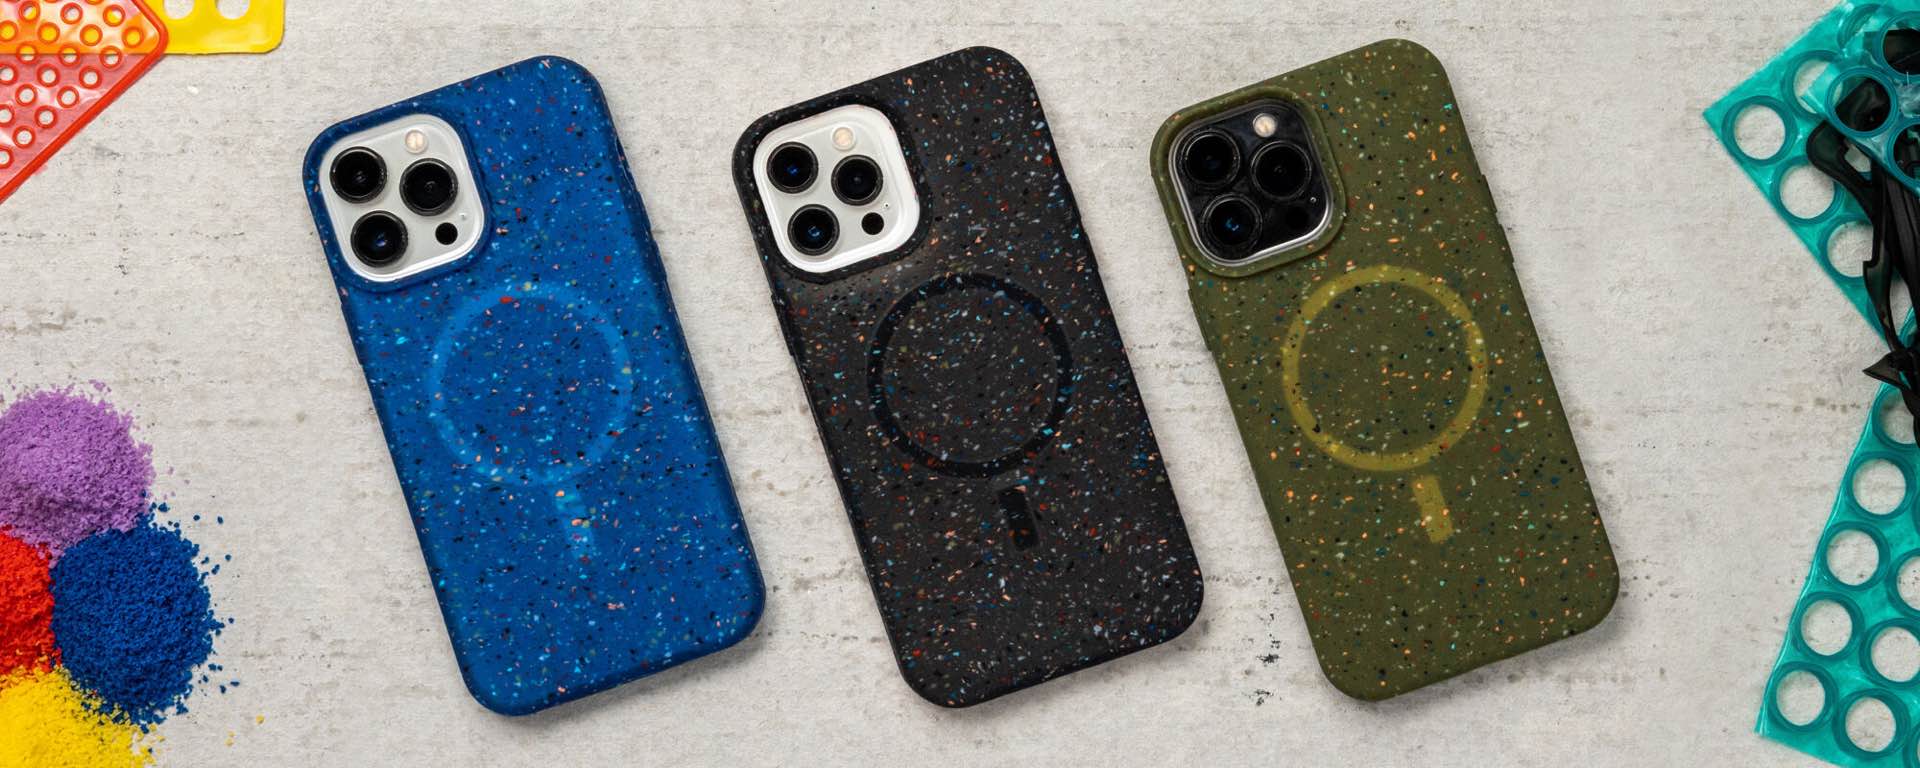 otterbox-core-series-recycled-iphone-magsafe-cases